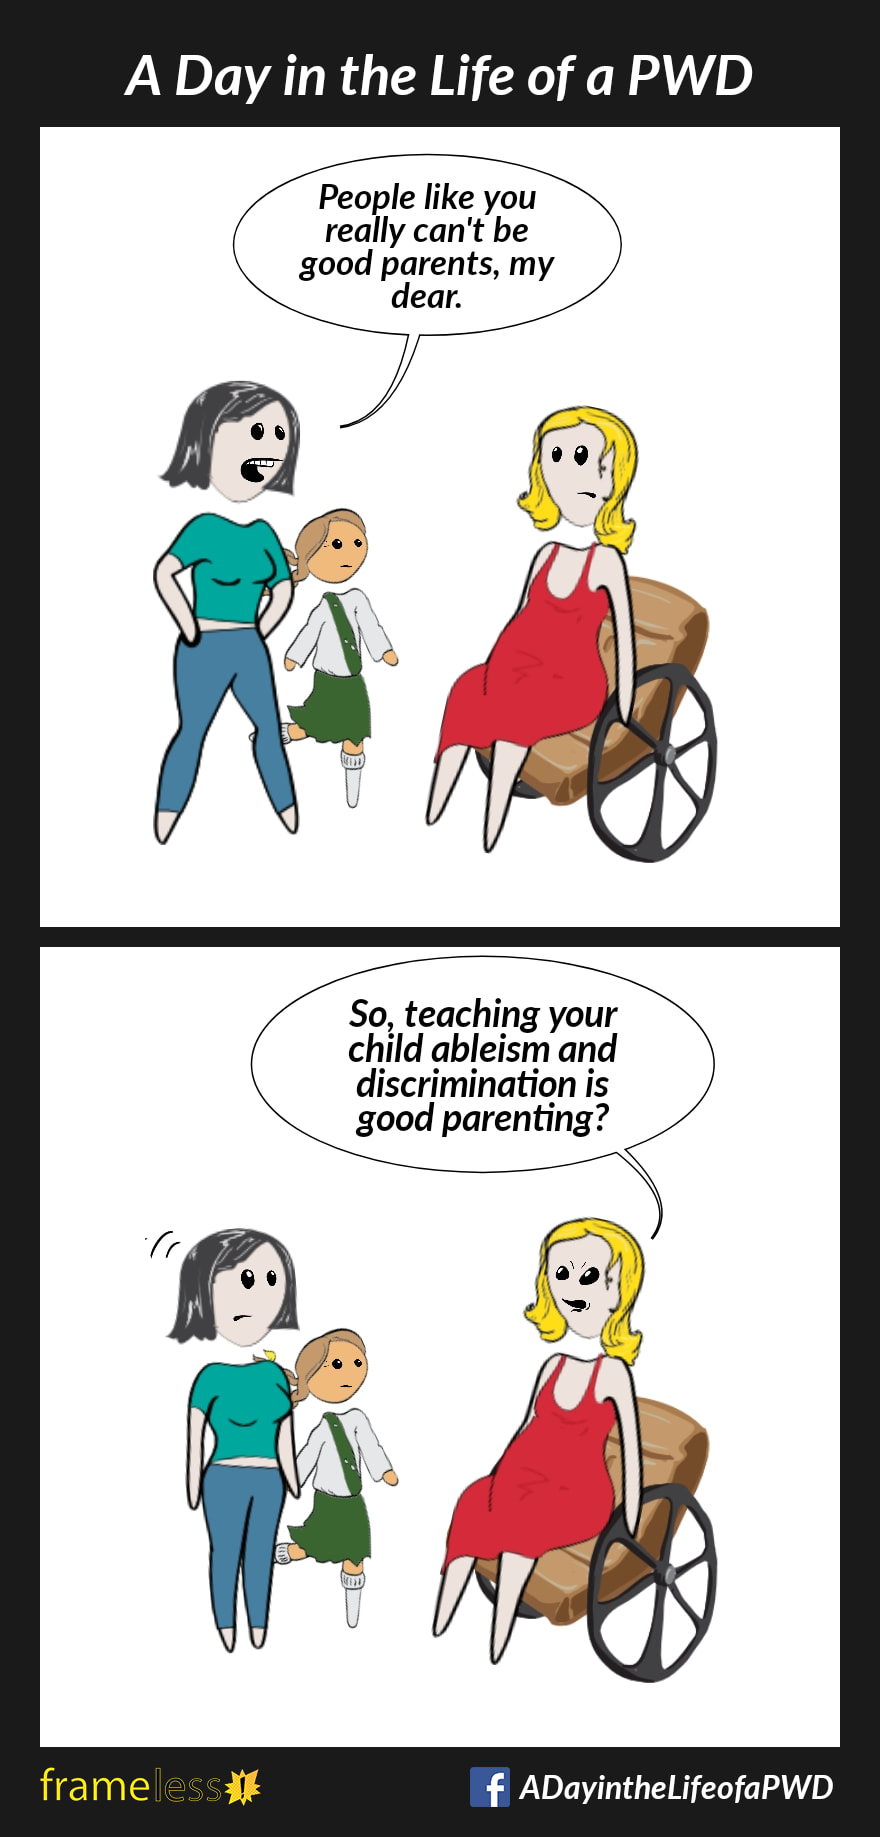 COMIC STRIP 
A Day in the Life of a PWD (Person With a Disability) 

Frame 1:
A pregnant woman in a wheelchair is talking to a mother with her daughter.
MOTHER: People like you can't really be good parents, my dear.

Frame 2:
WOMAN: So, teaching your child ableism and discrimination is good parenting?